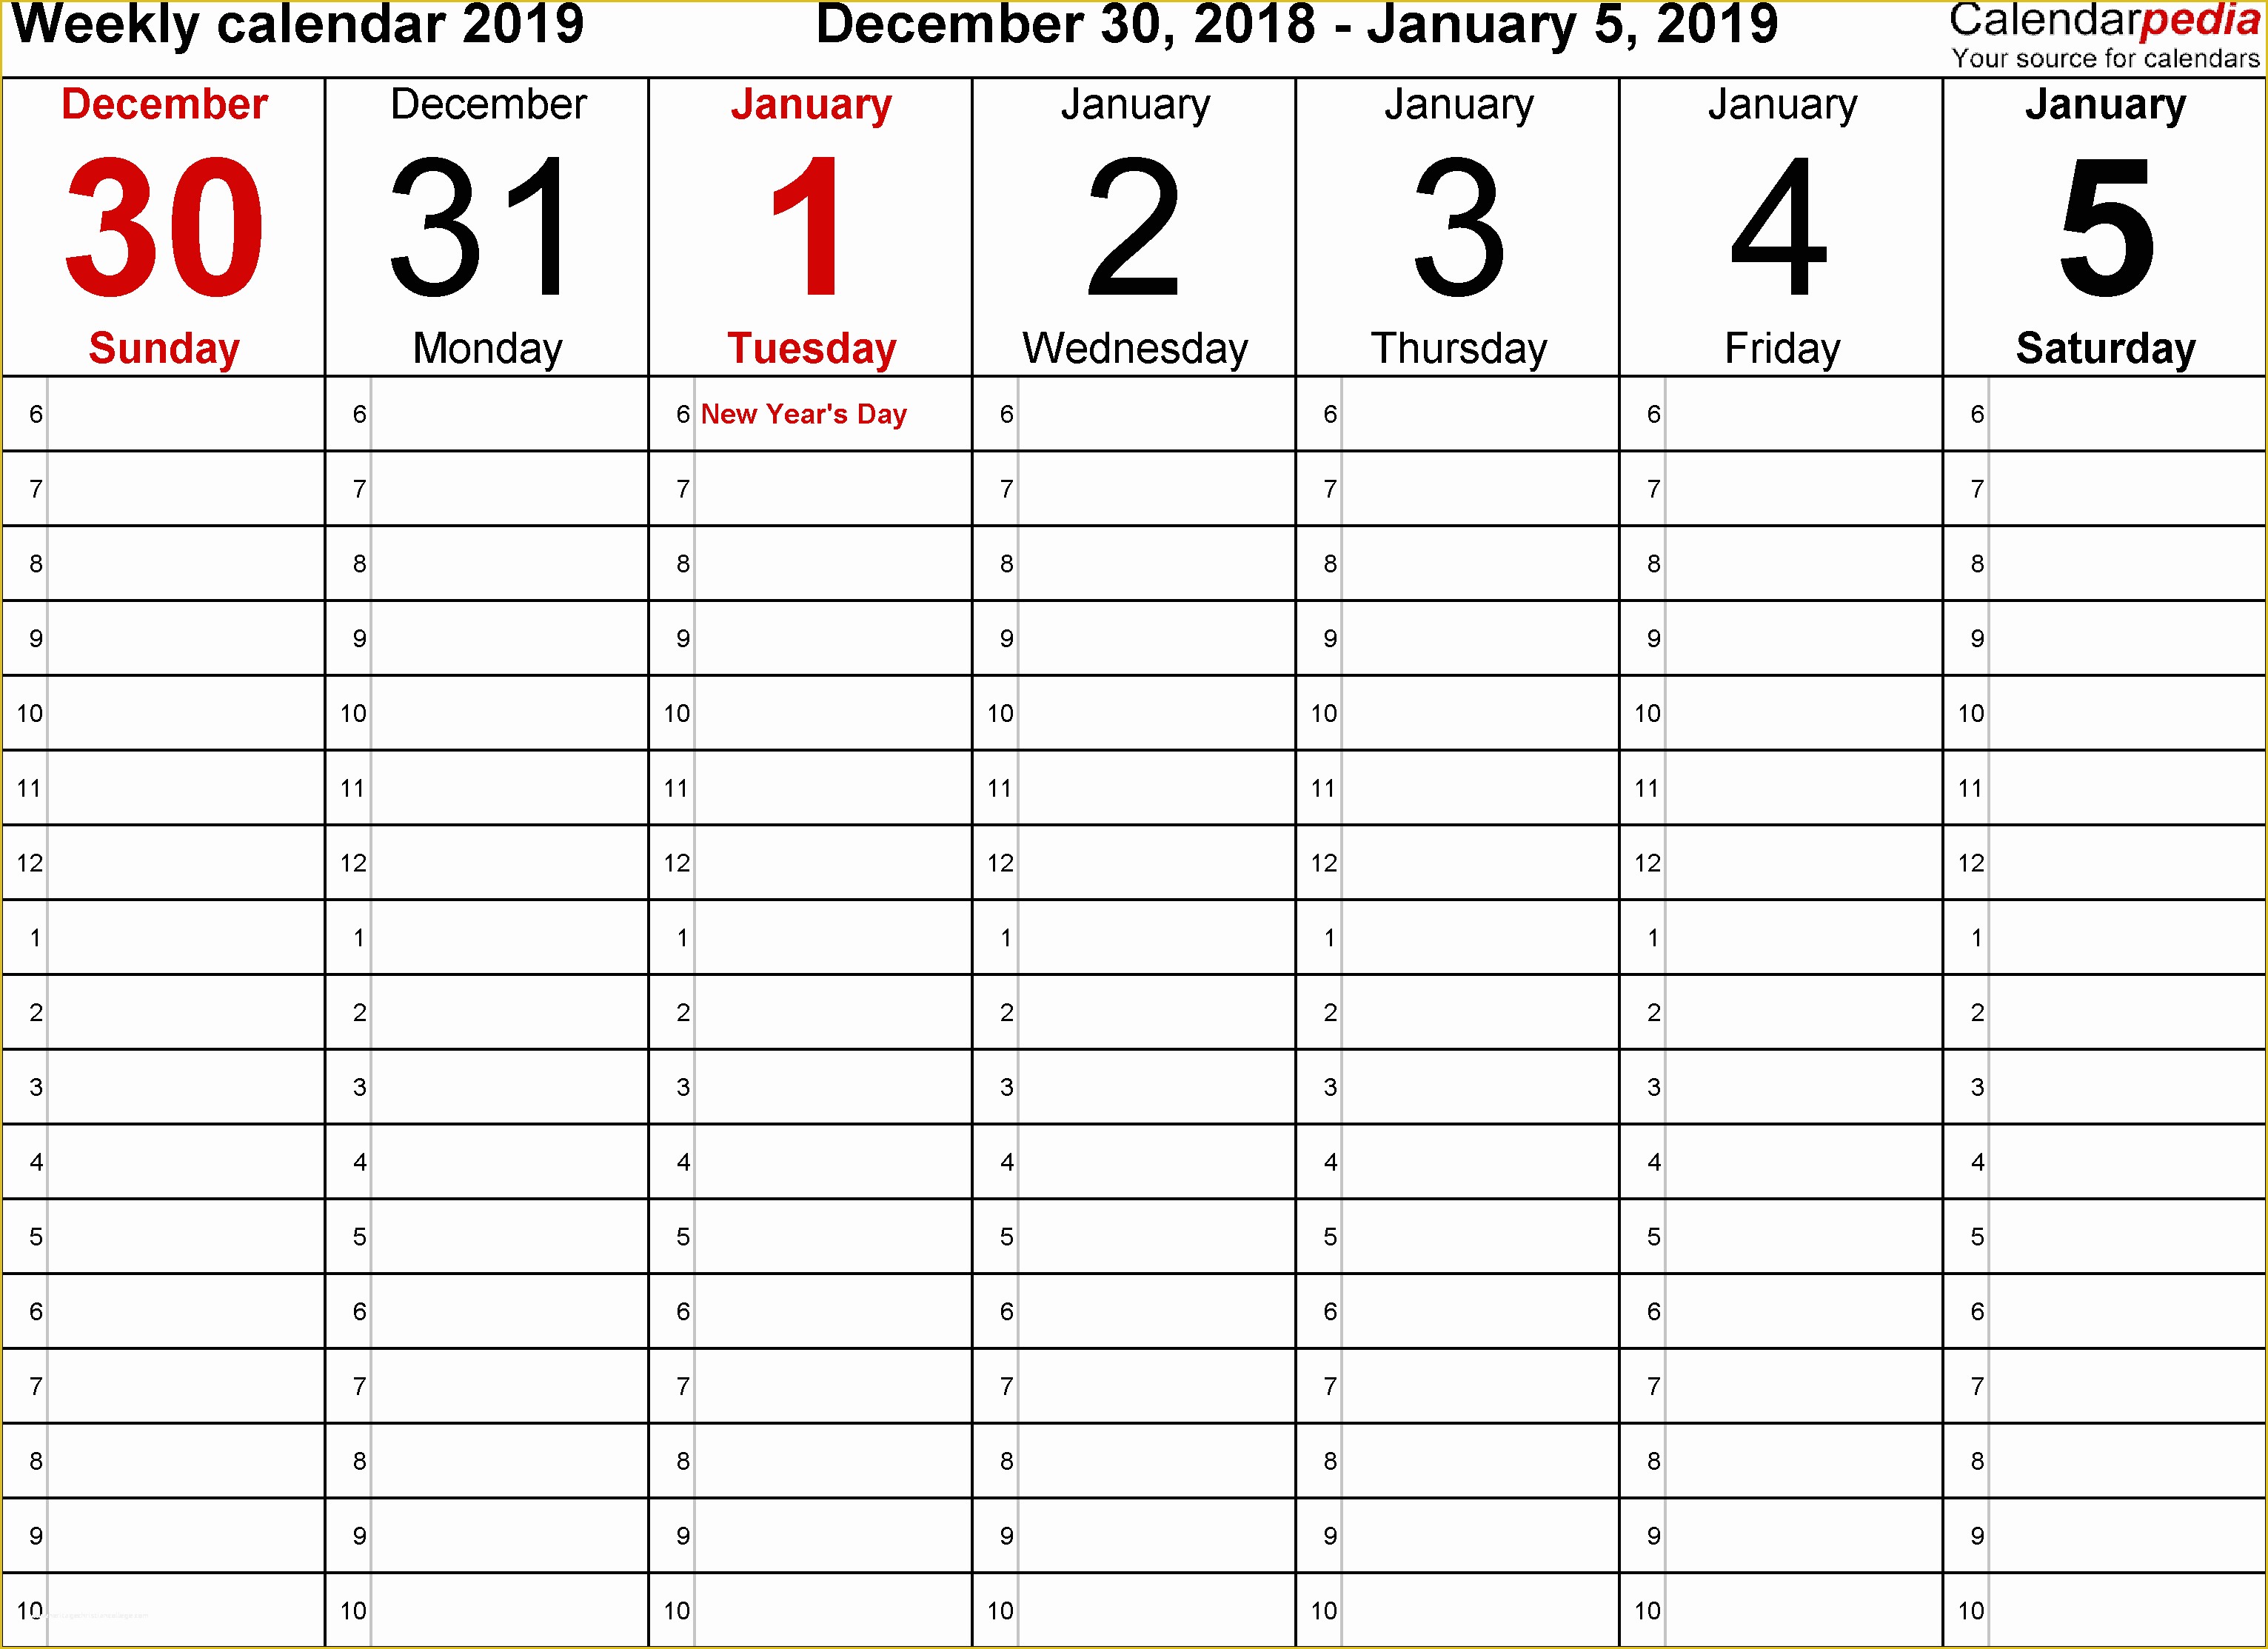 Free Calendar Template 2019 Of Weekly Calendar 2019 for Word 12 Free Printable Templates